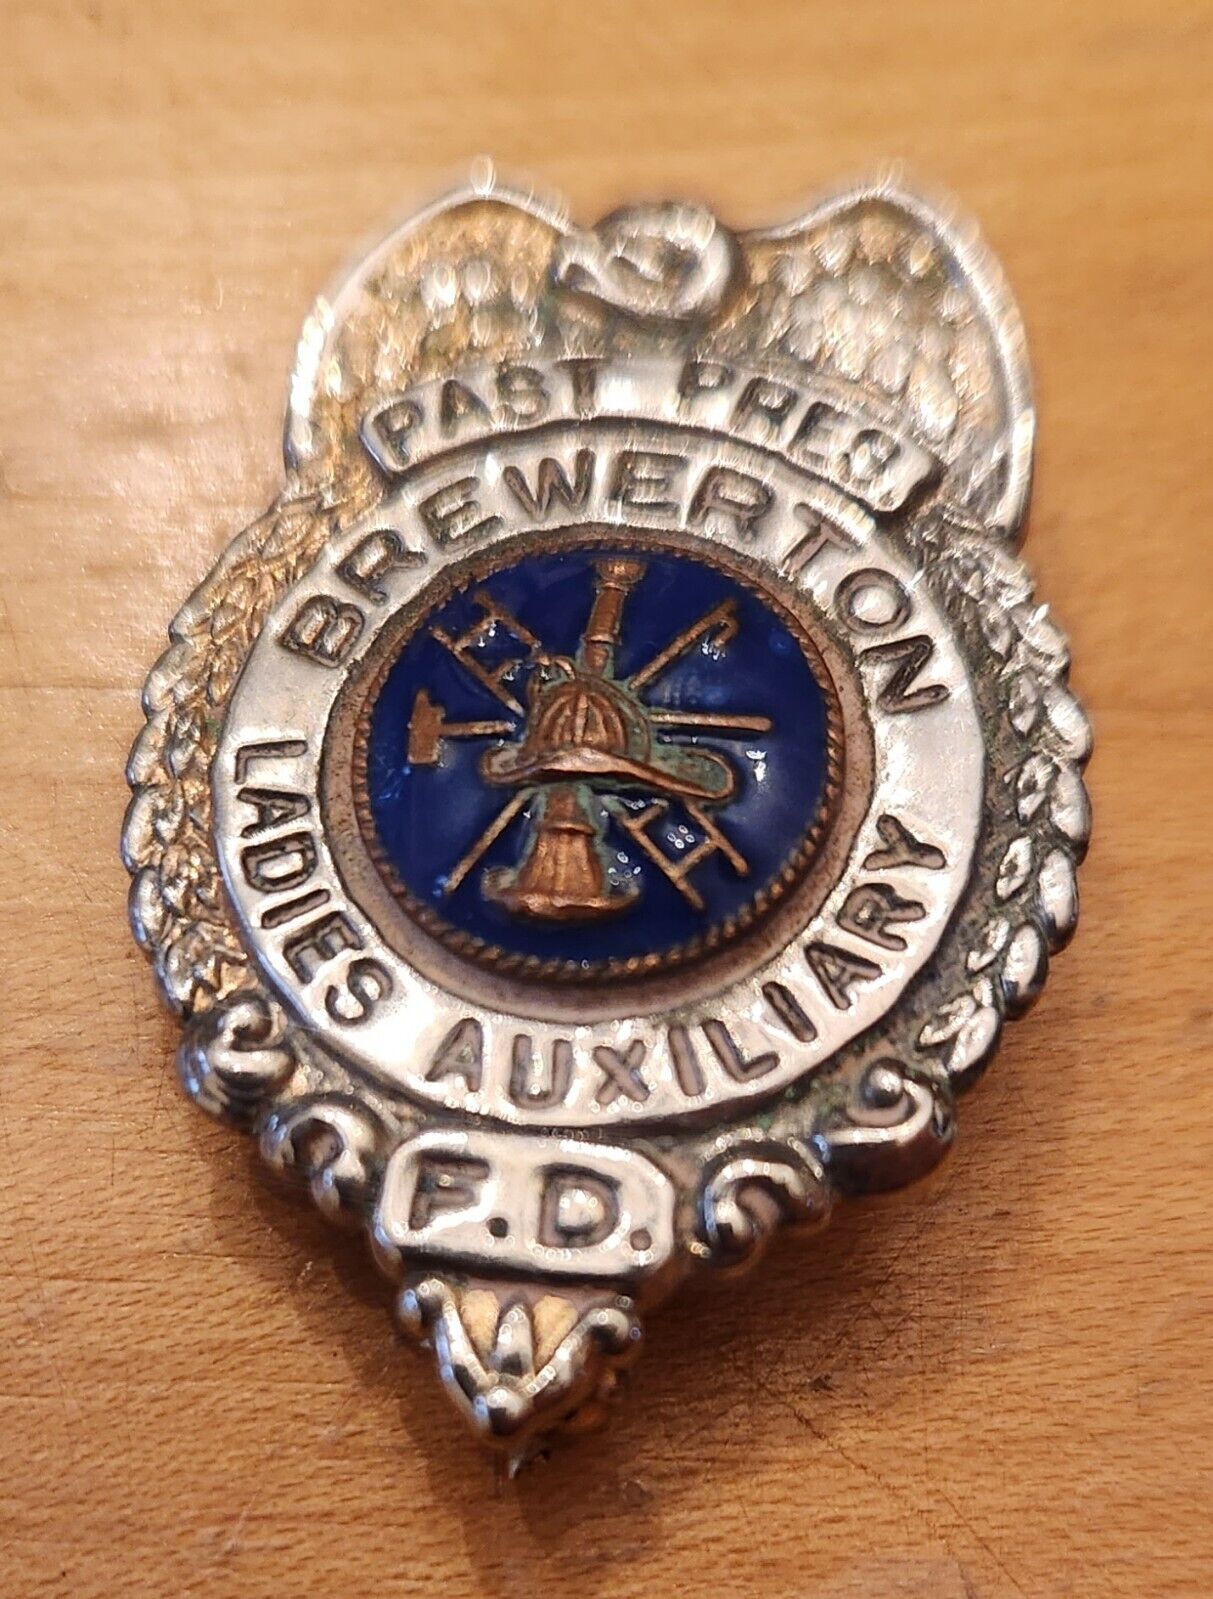 OLD BREWERTON NY LADIES AUXILIARY PAST PRESIDENT FIRE BADGE FIREFIGHTER NEW YORK